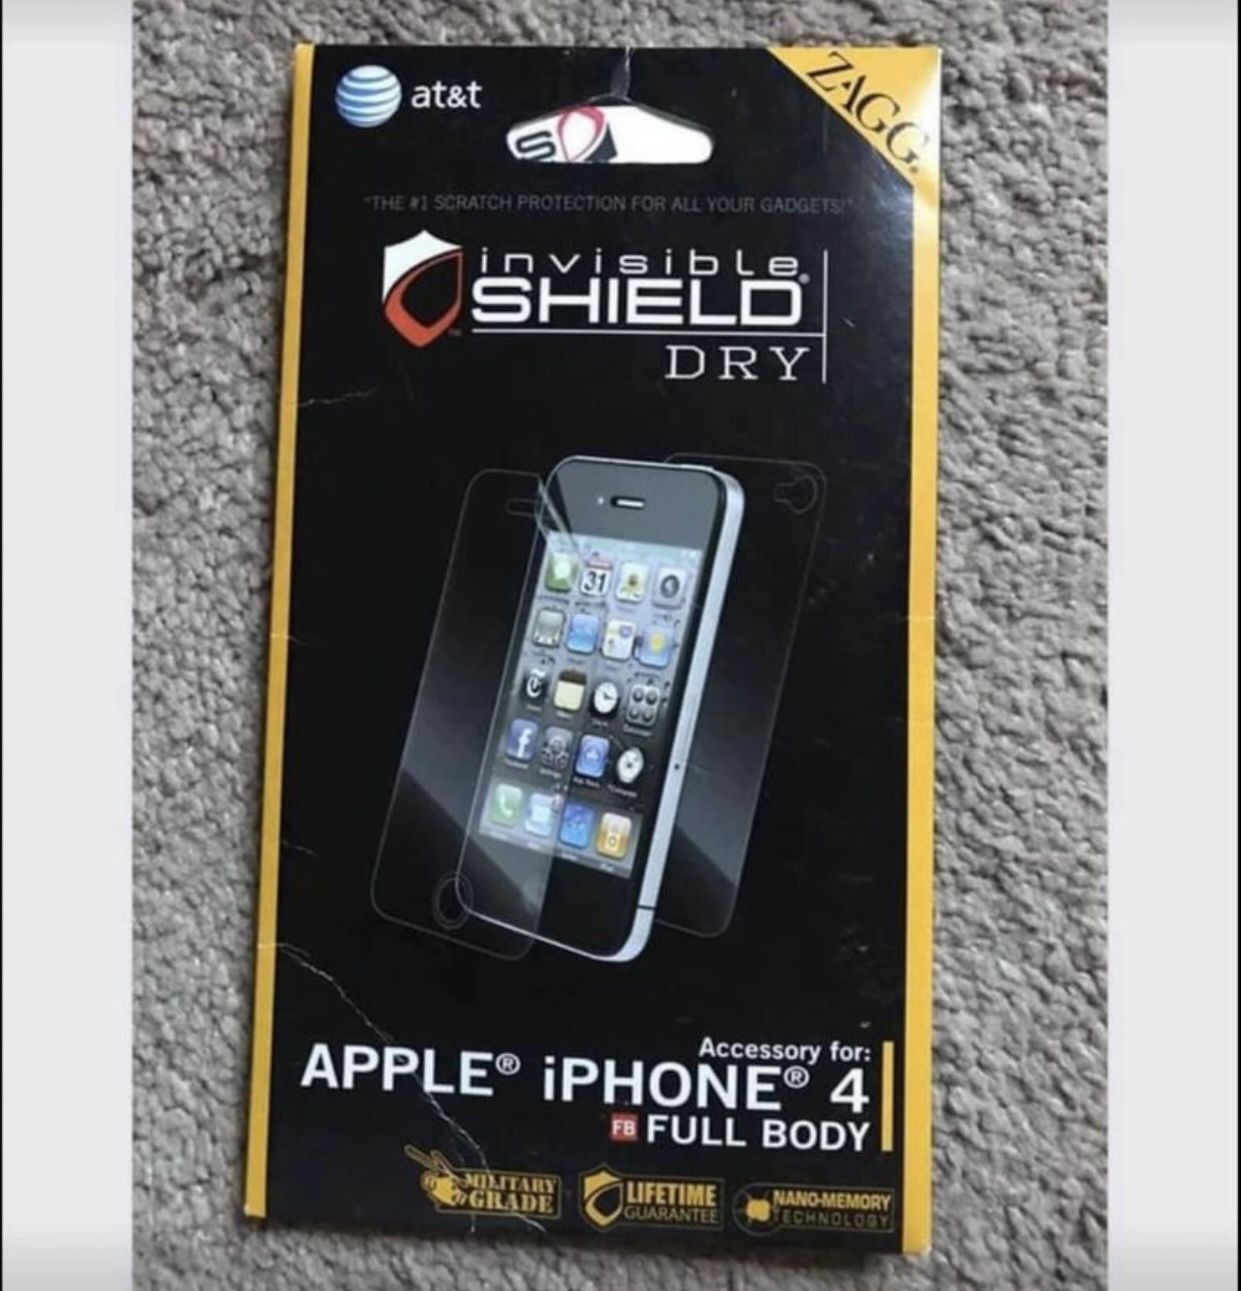 NWT Apple iPhone 4 Invisible Shield Dry 